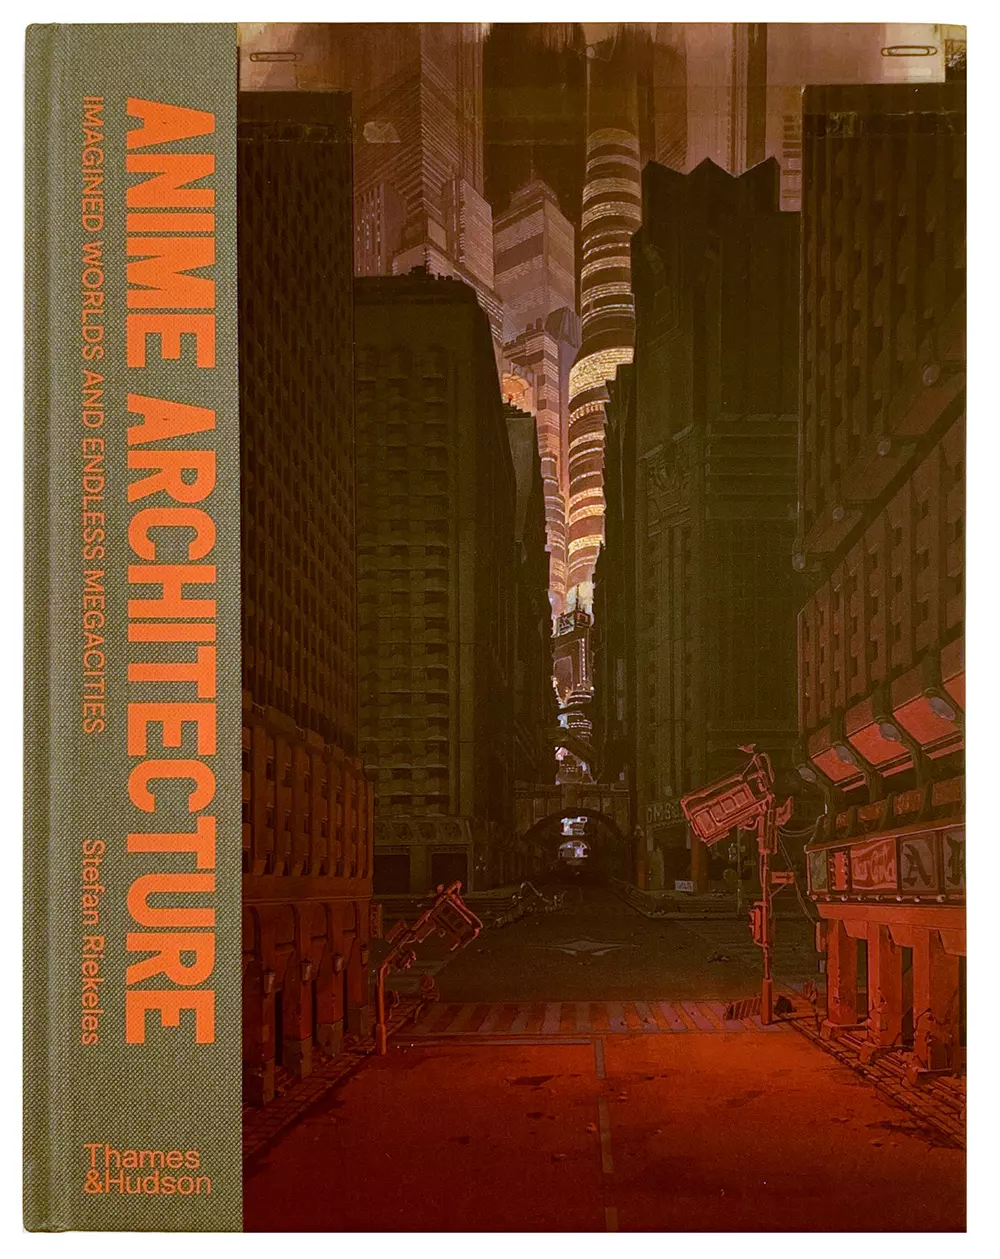 Anime Architecture: Imagined Worlds and Endless Megacities